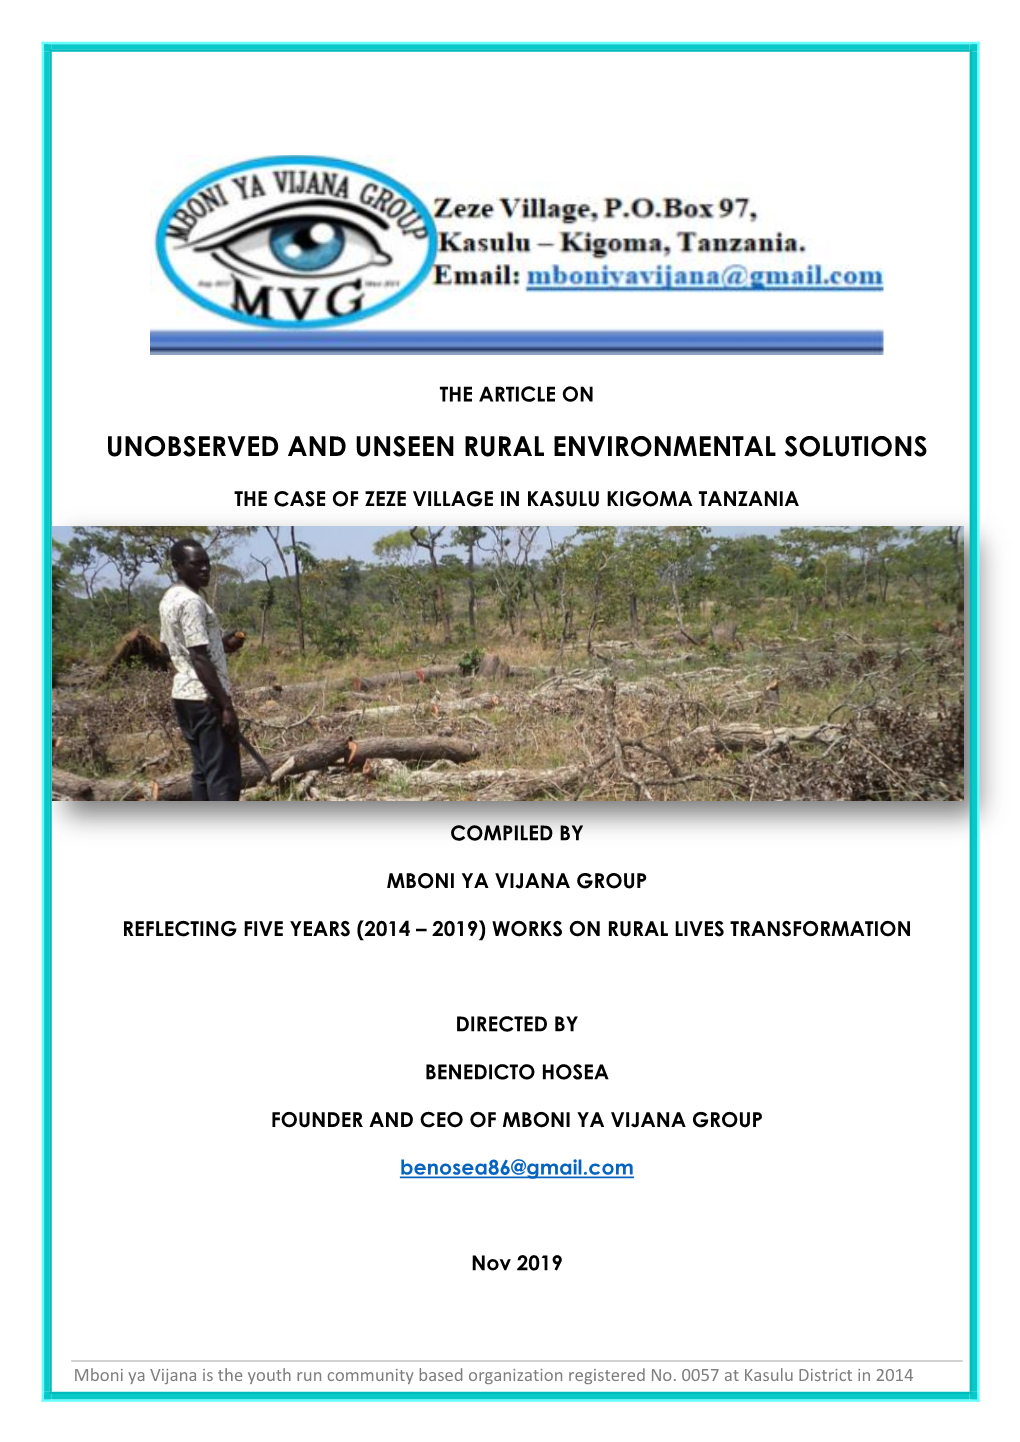 Unobserved and Unseen Rural Environmental Solutions